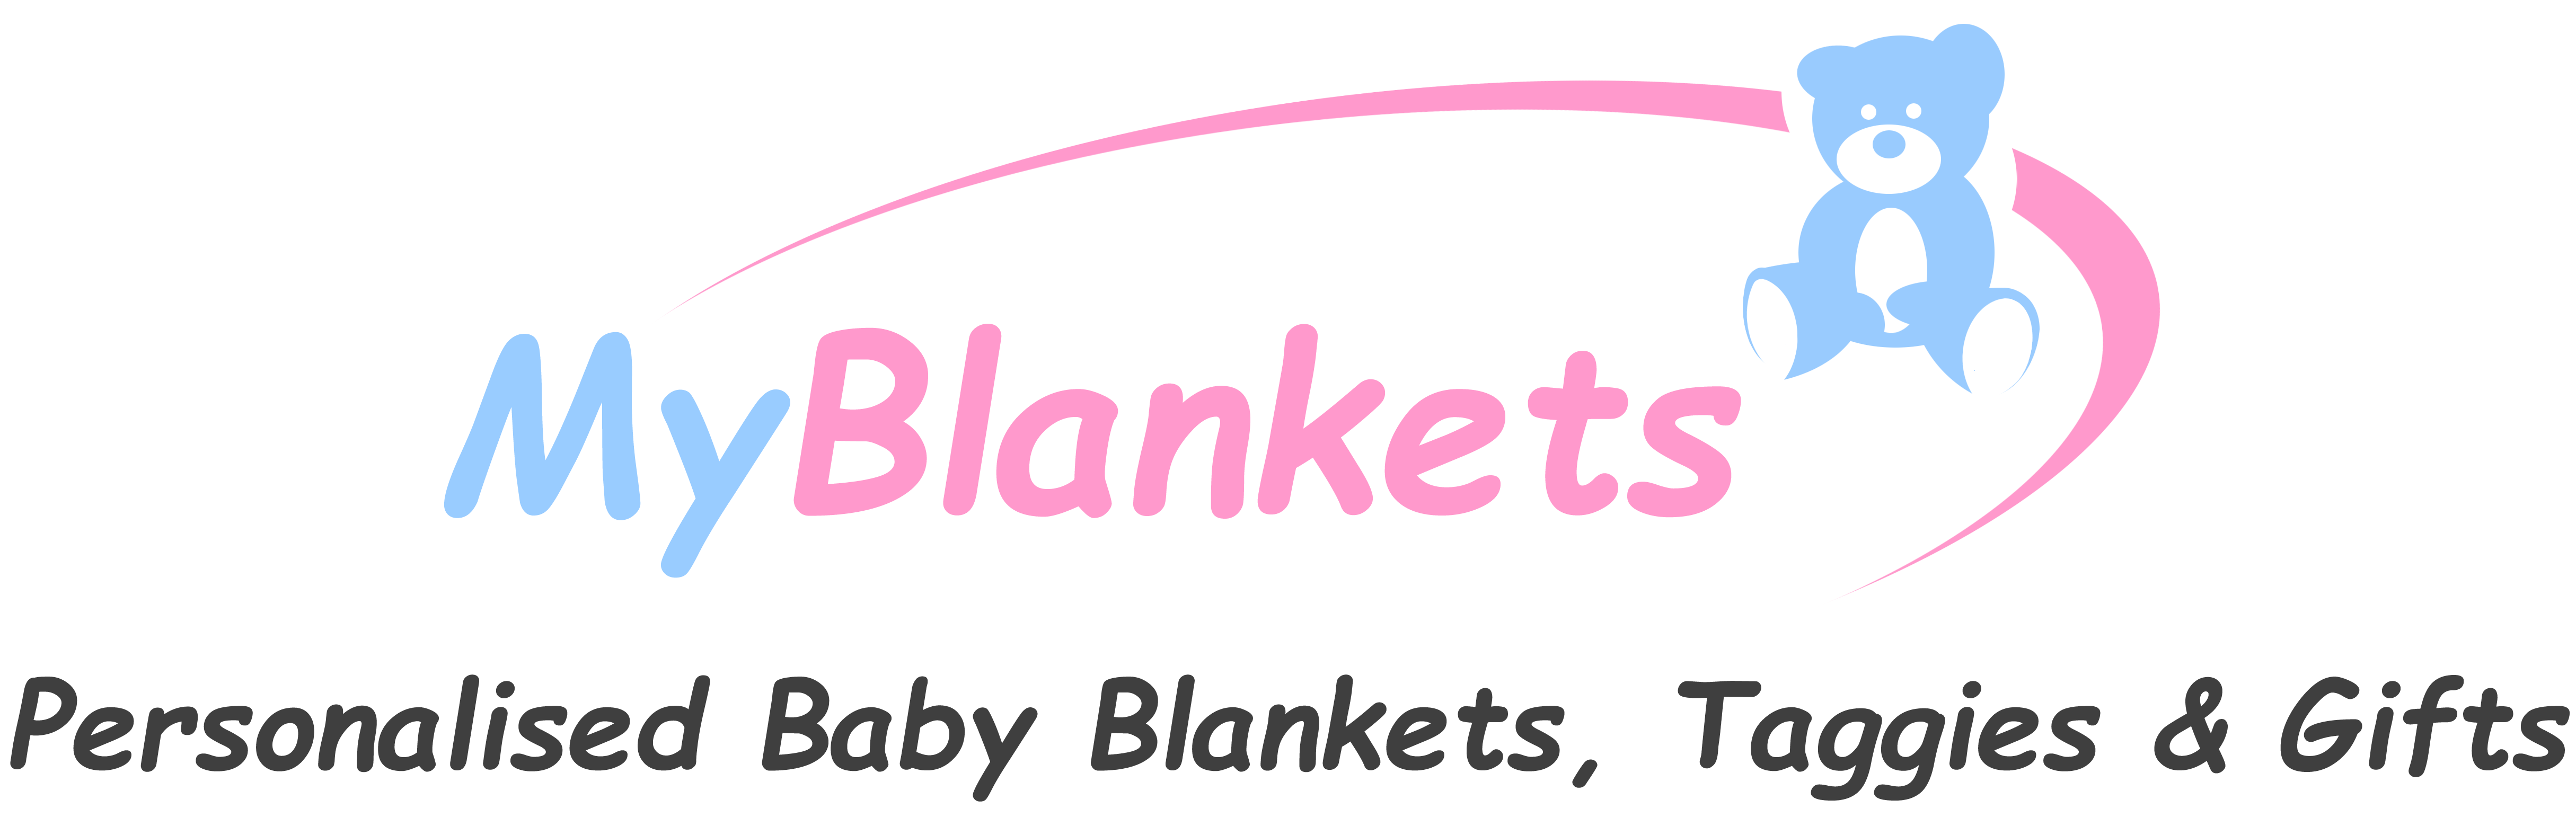 Logo of MyBlankets.com Baby Products In Wadhurst, East Sussex